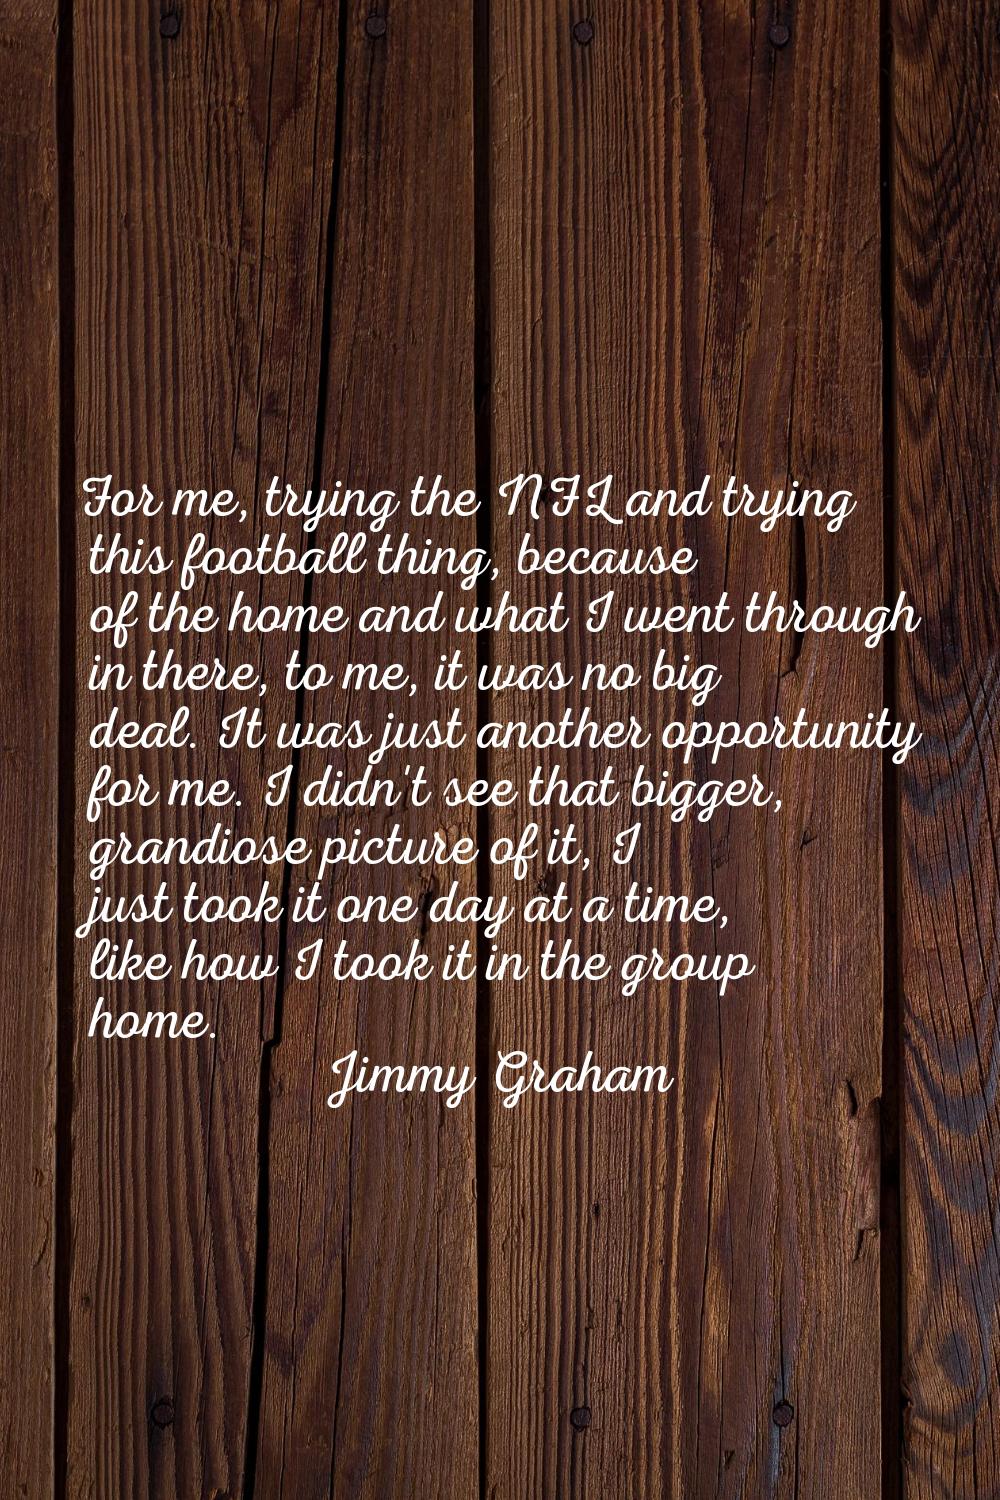 For me, trying the NFL and trying this football thing, because of the home and what I went through 